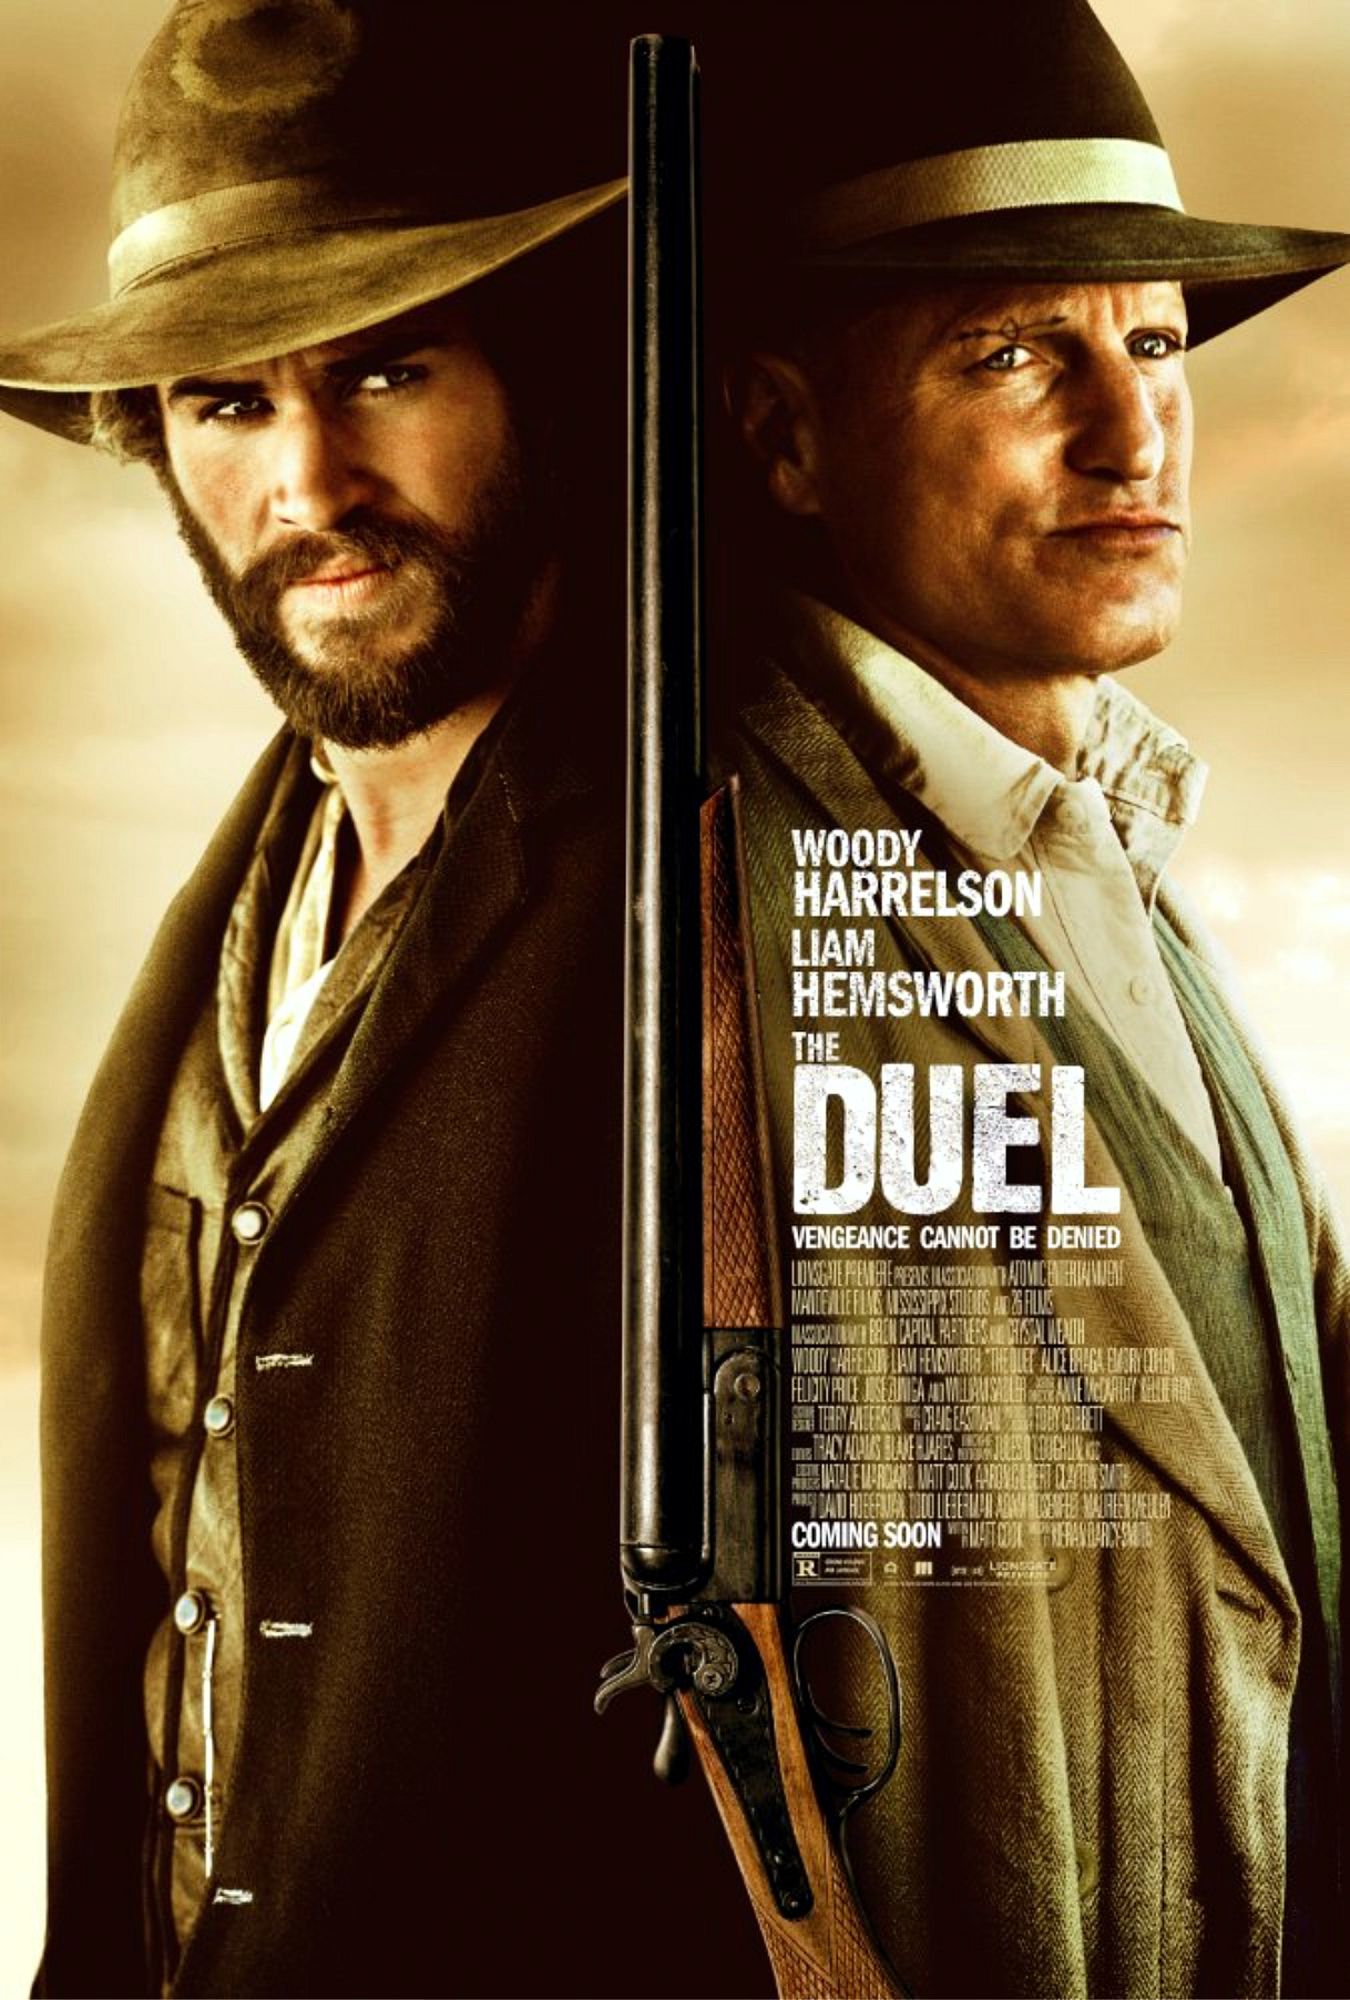 The DUEL 2016 poster